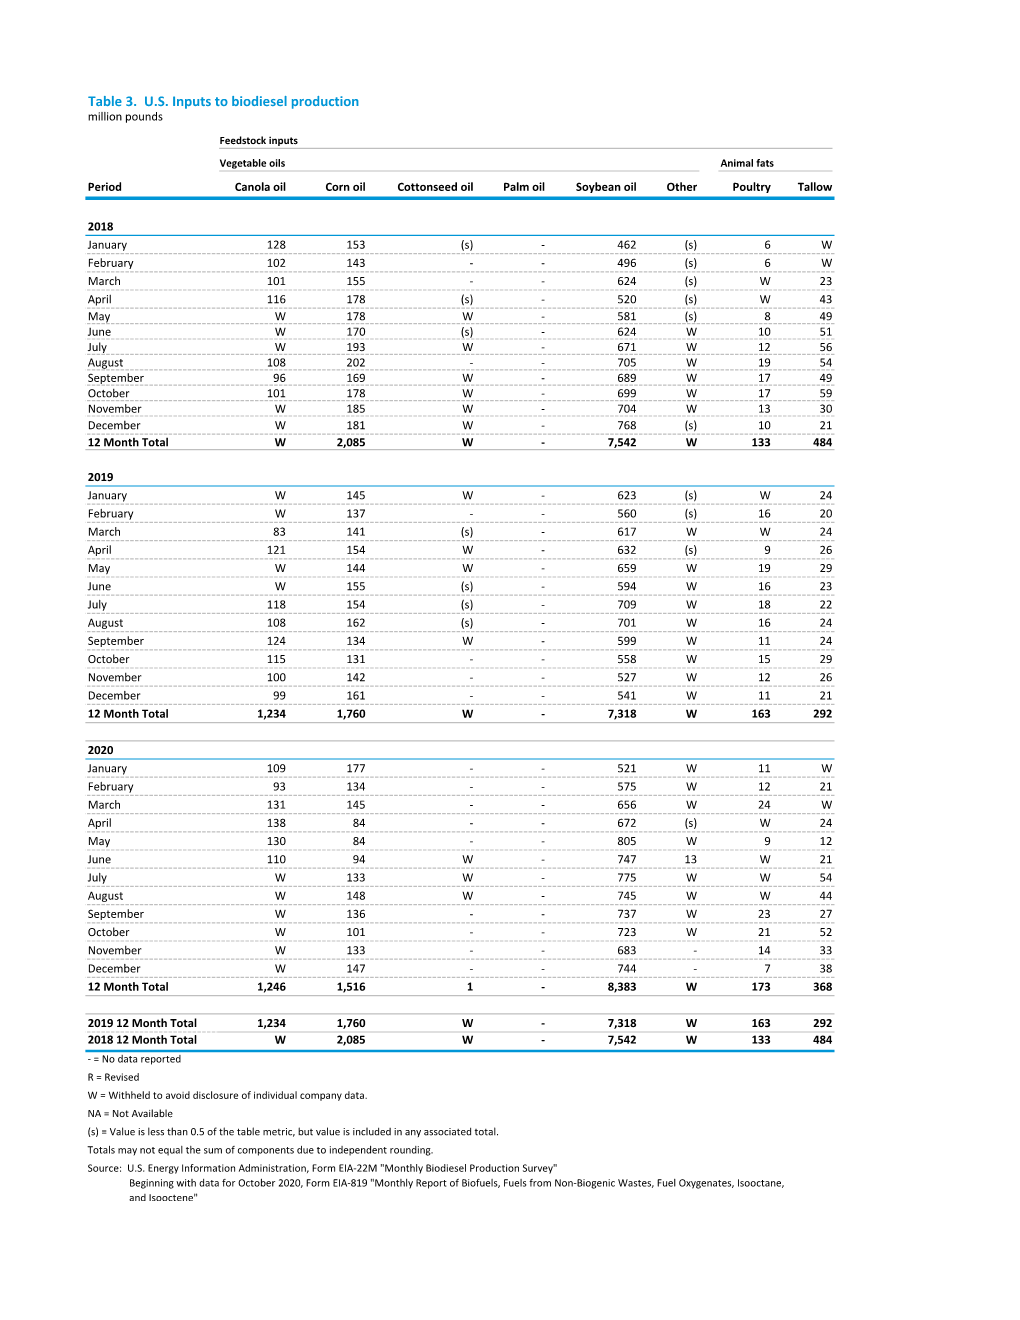 Table 3. U.S. Inputs to Biodiesel Production Million Pounds